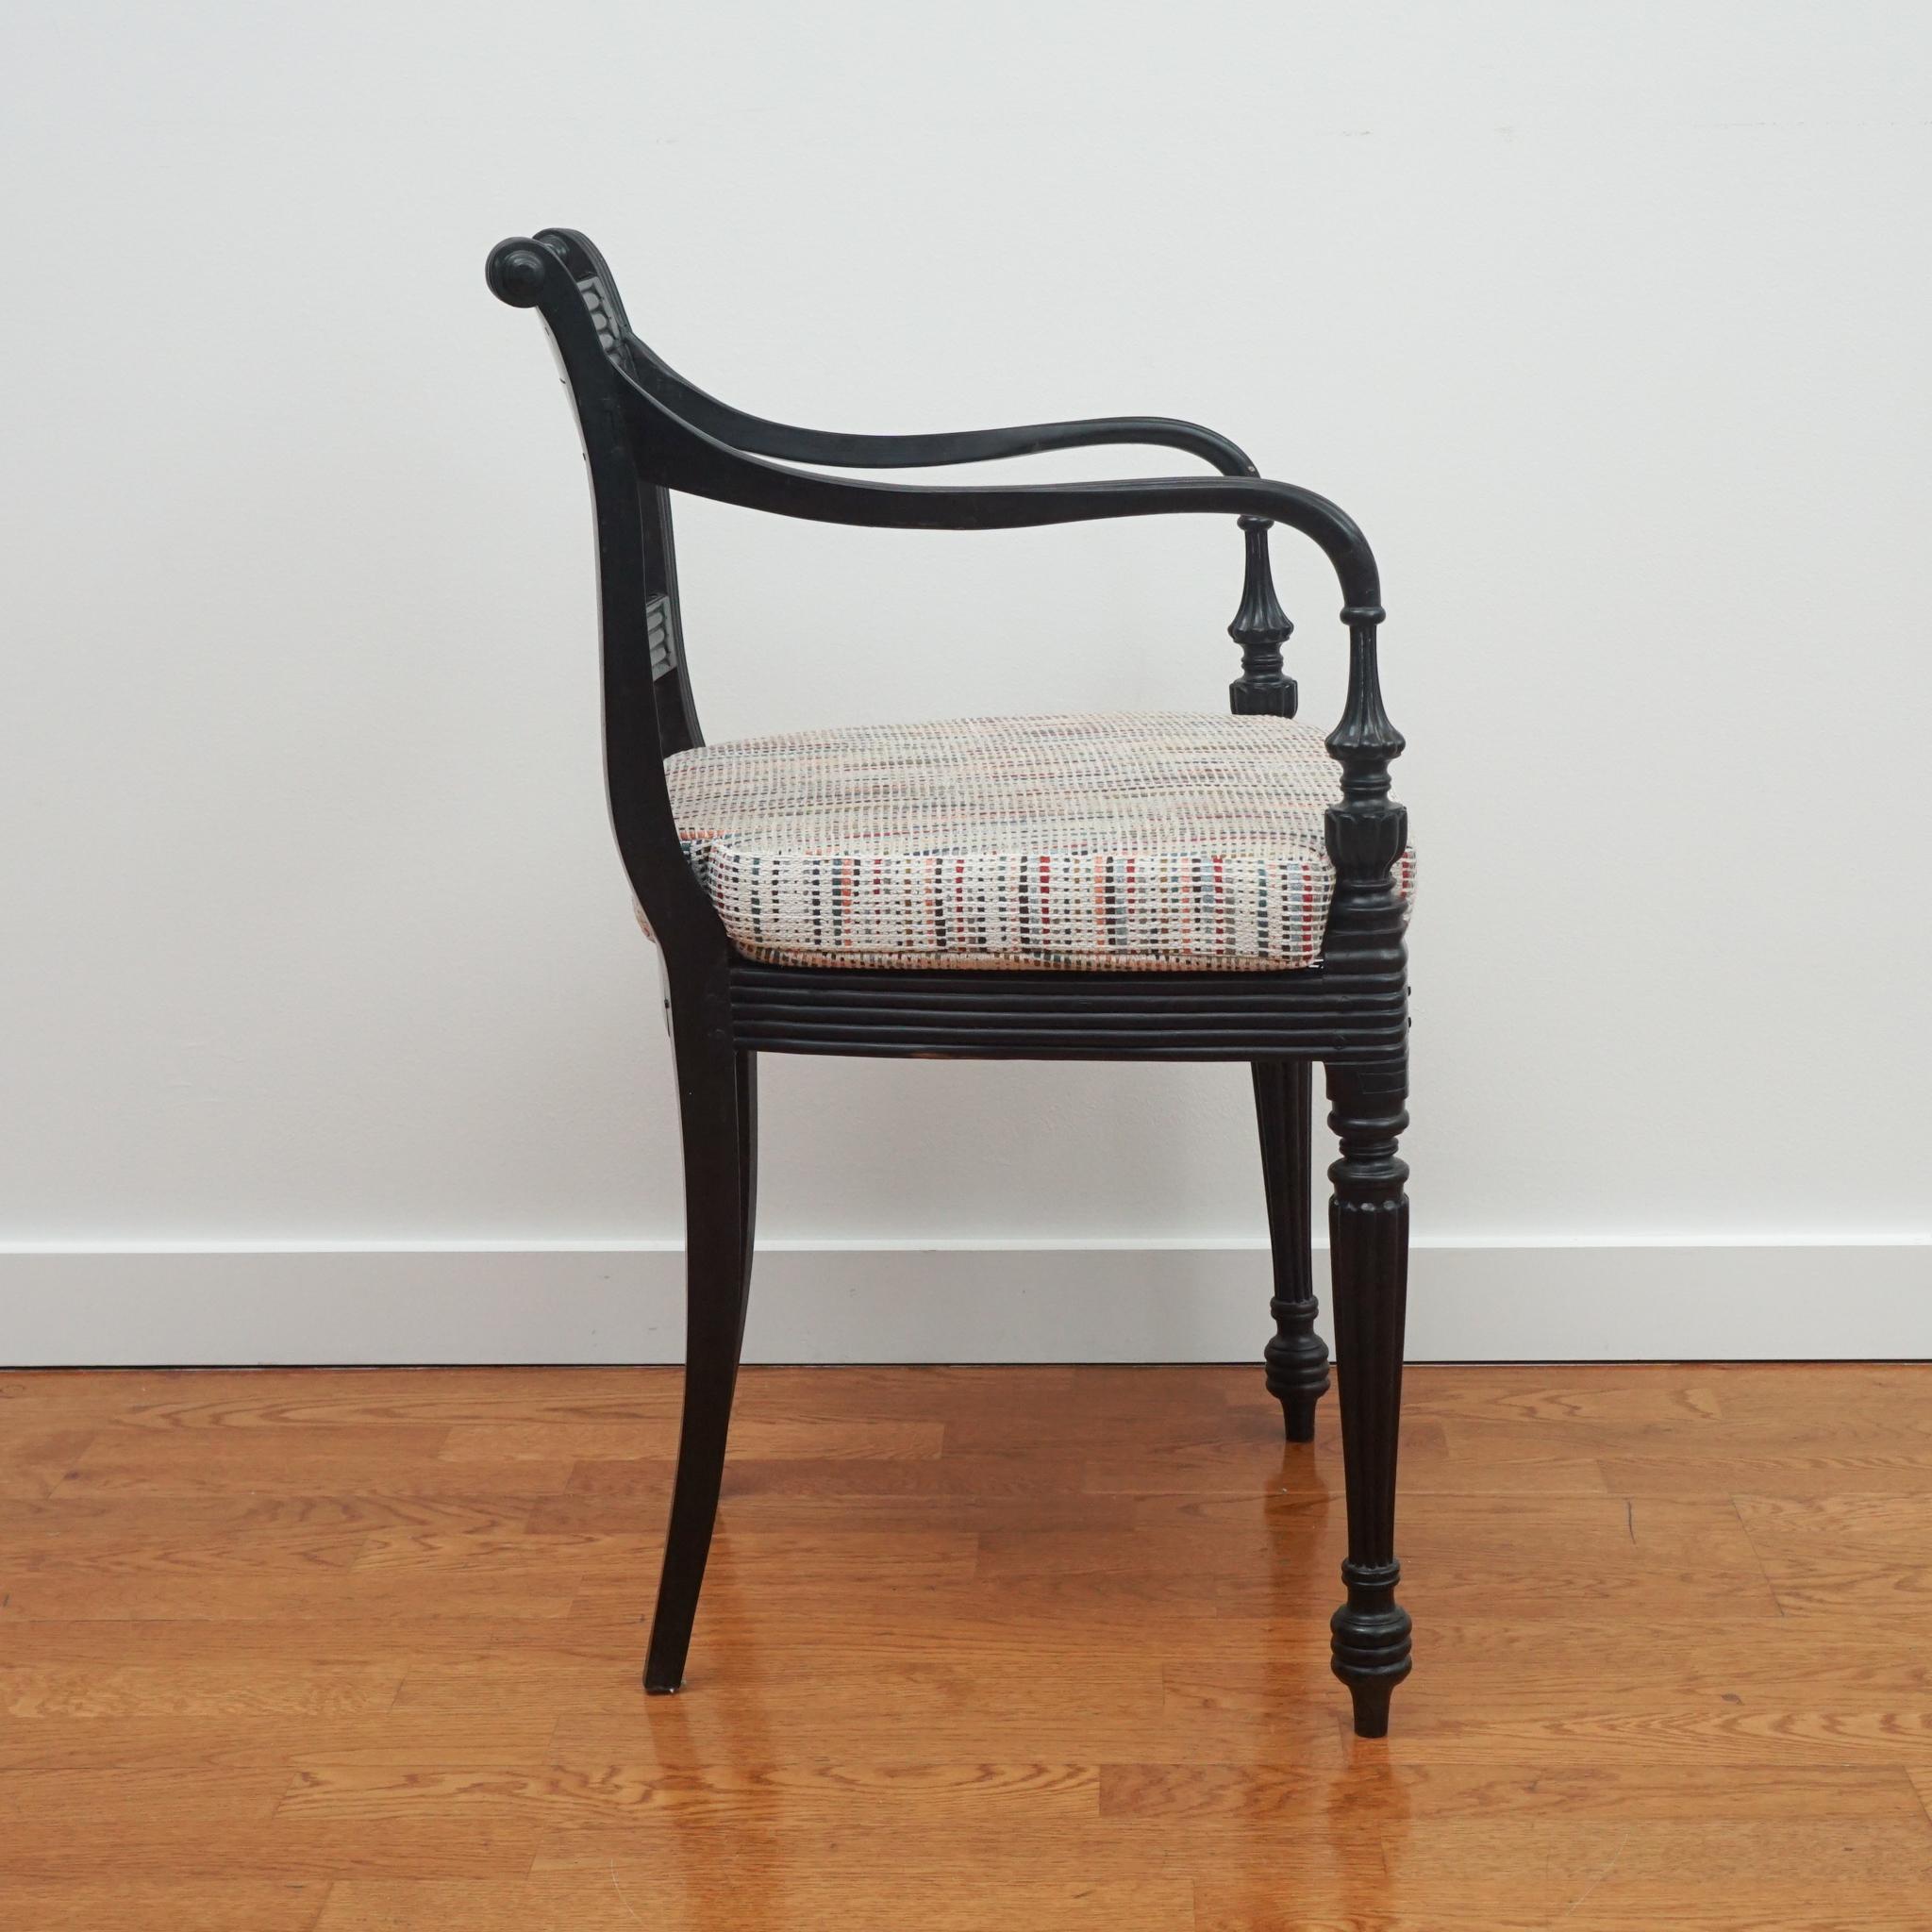 The set of four ebony carved arm chairs, shown here, are from India, circa 19th century. Featuring hand-caned seats, each chair is intricately carved of ebony wood and as stylish today as they were when they were first made. Each chair comes with